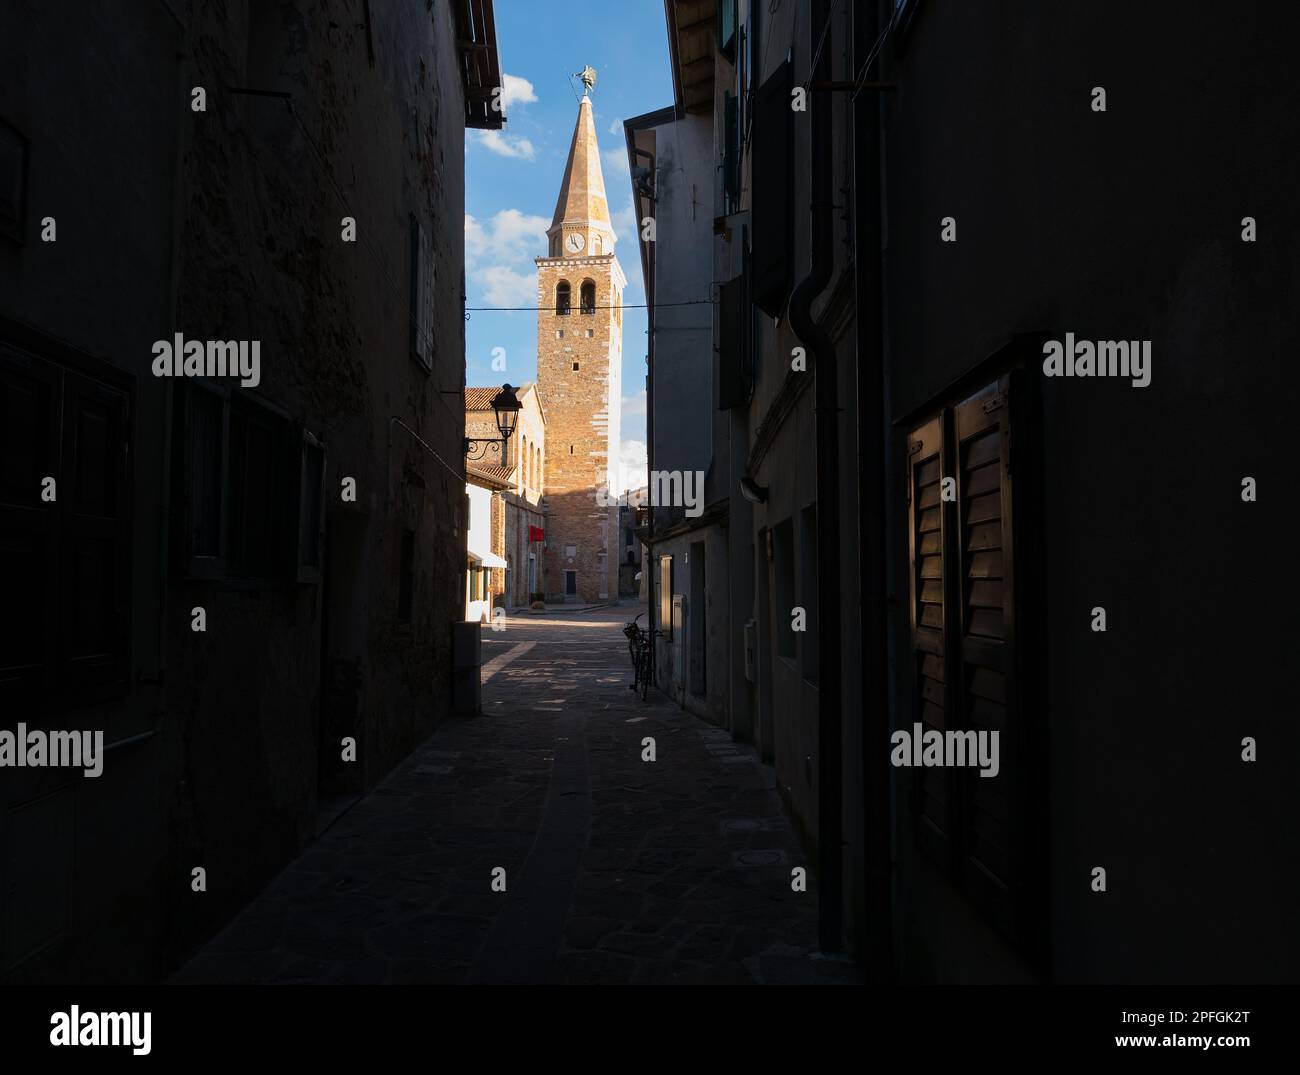 Grado, Italy - View of the bell tower of the ancient basilica at the end of antique and pictoresque alley Stock Photo